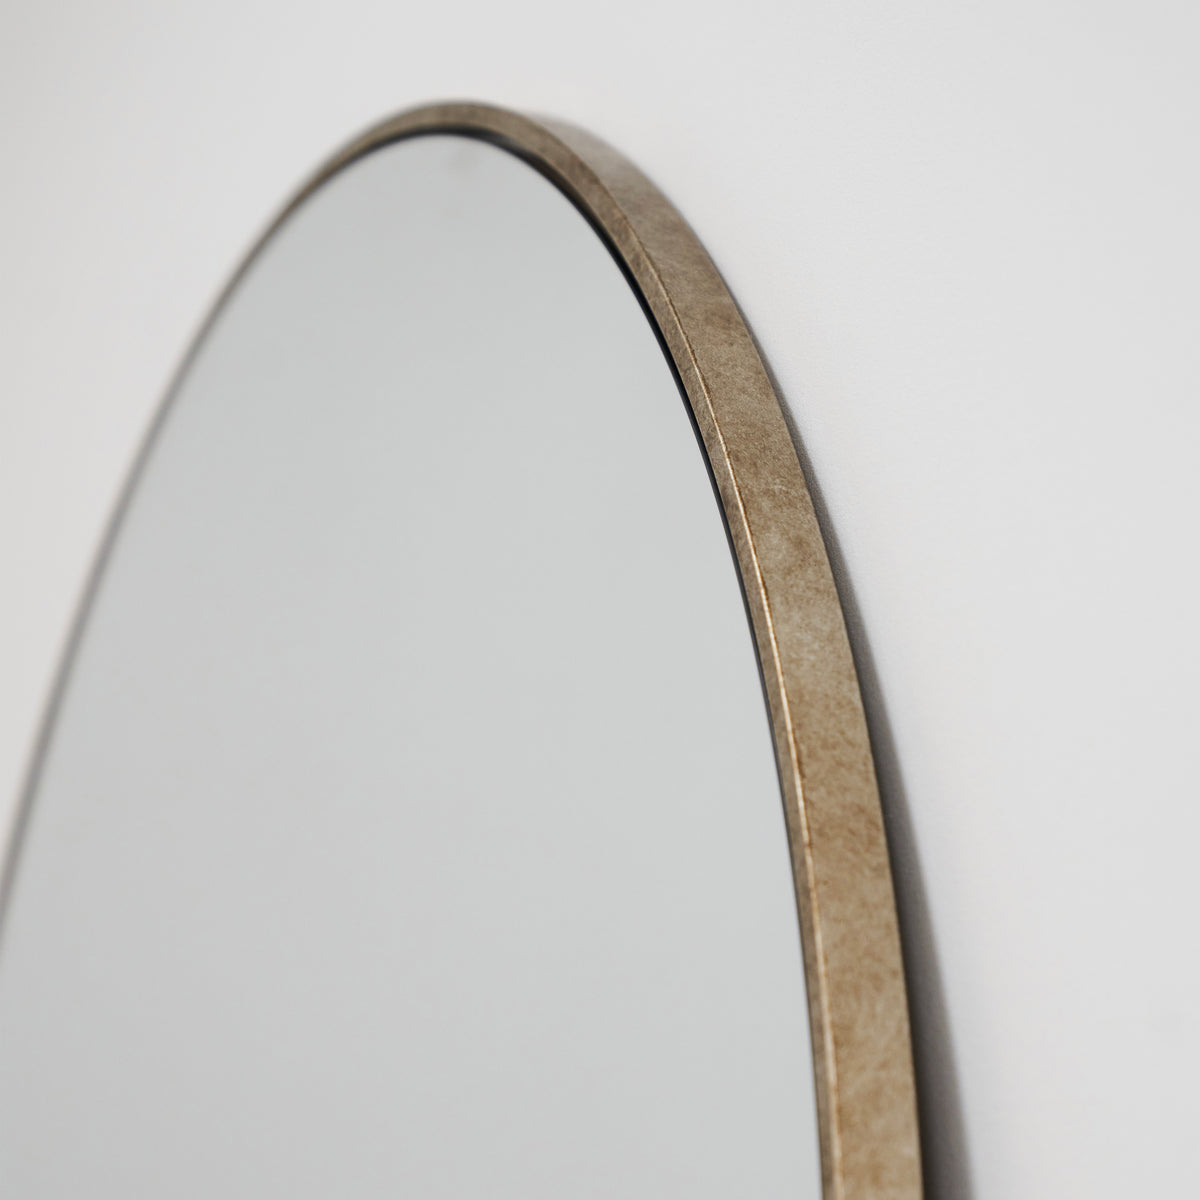 Liberty - Champagne Full Length Arched Metal Mirror 200cm x 120cm